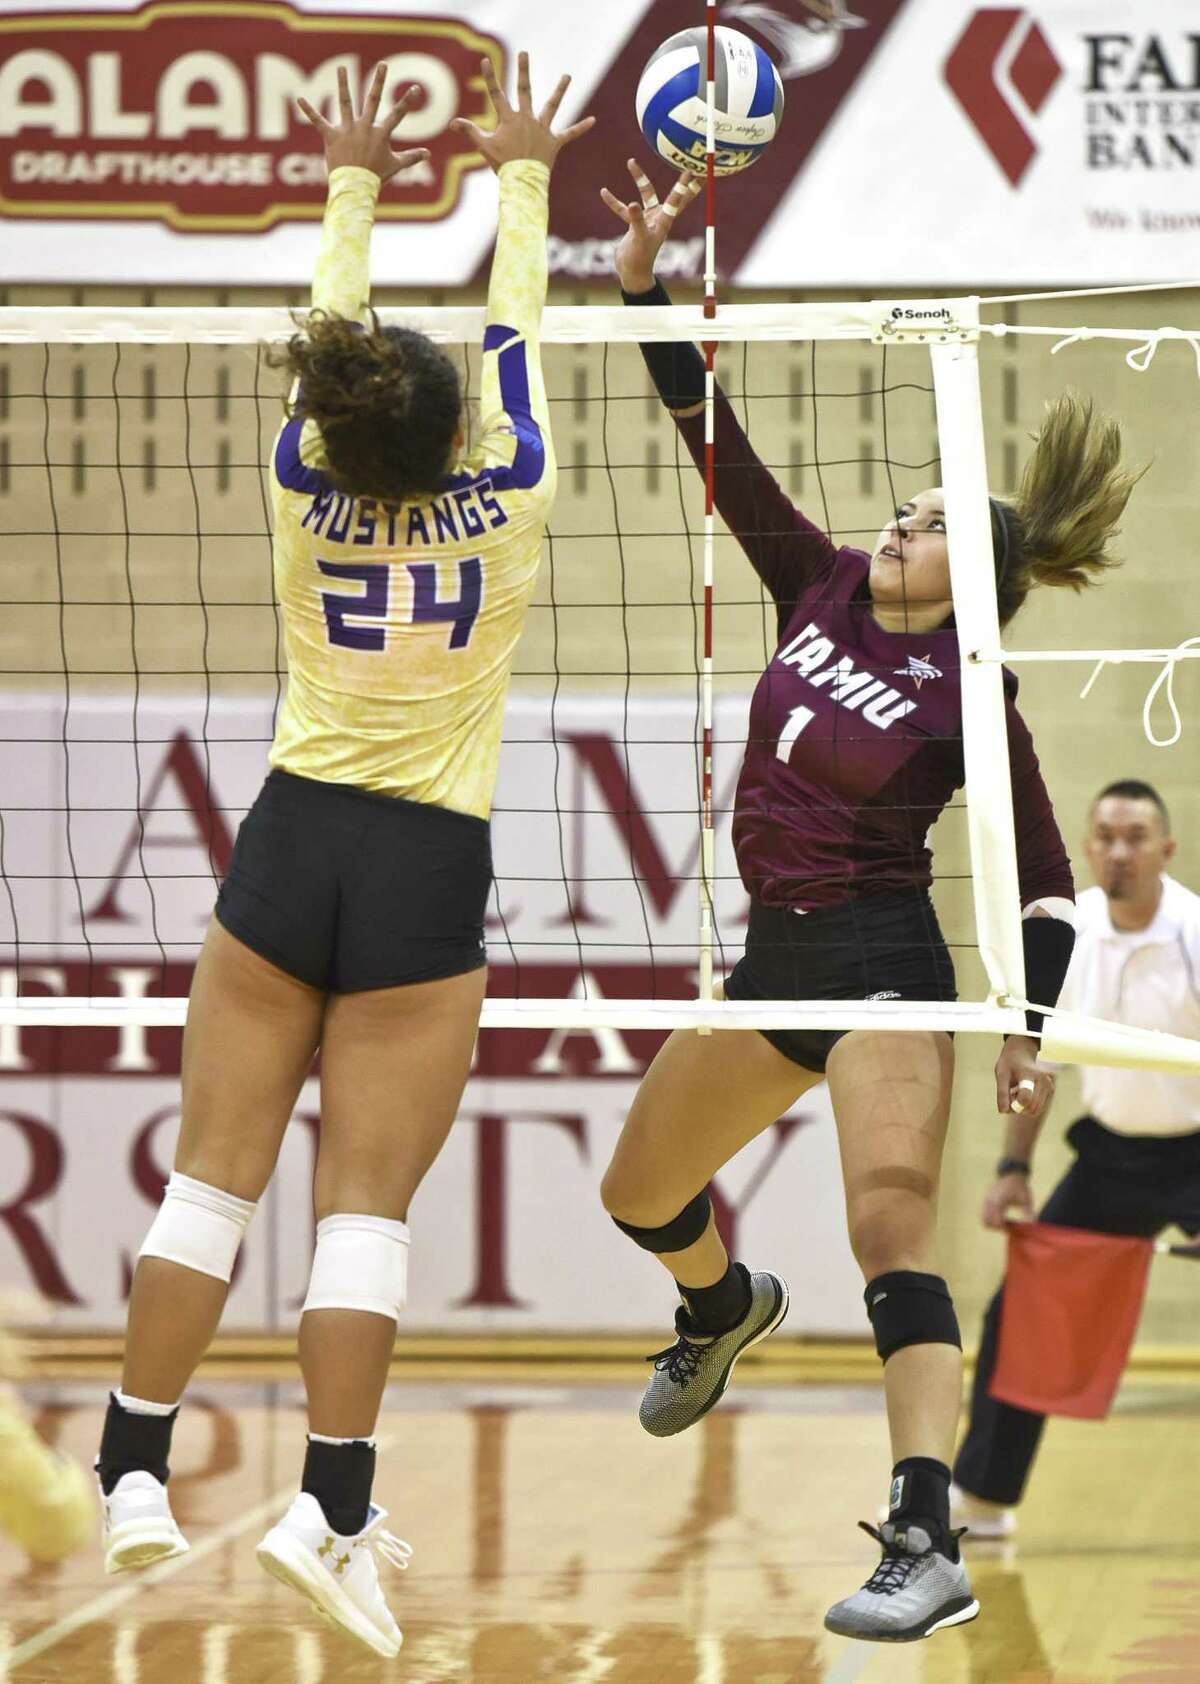 TAMIU Sammantha Herrera taps the ball over the net during a game against The University of Texas of the Permian Basin on Saturday, Sept. 8, 2018, at TAMIU.